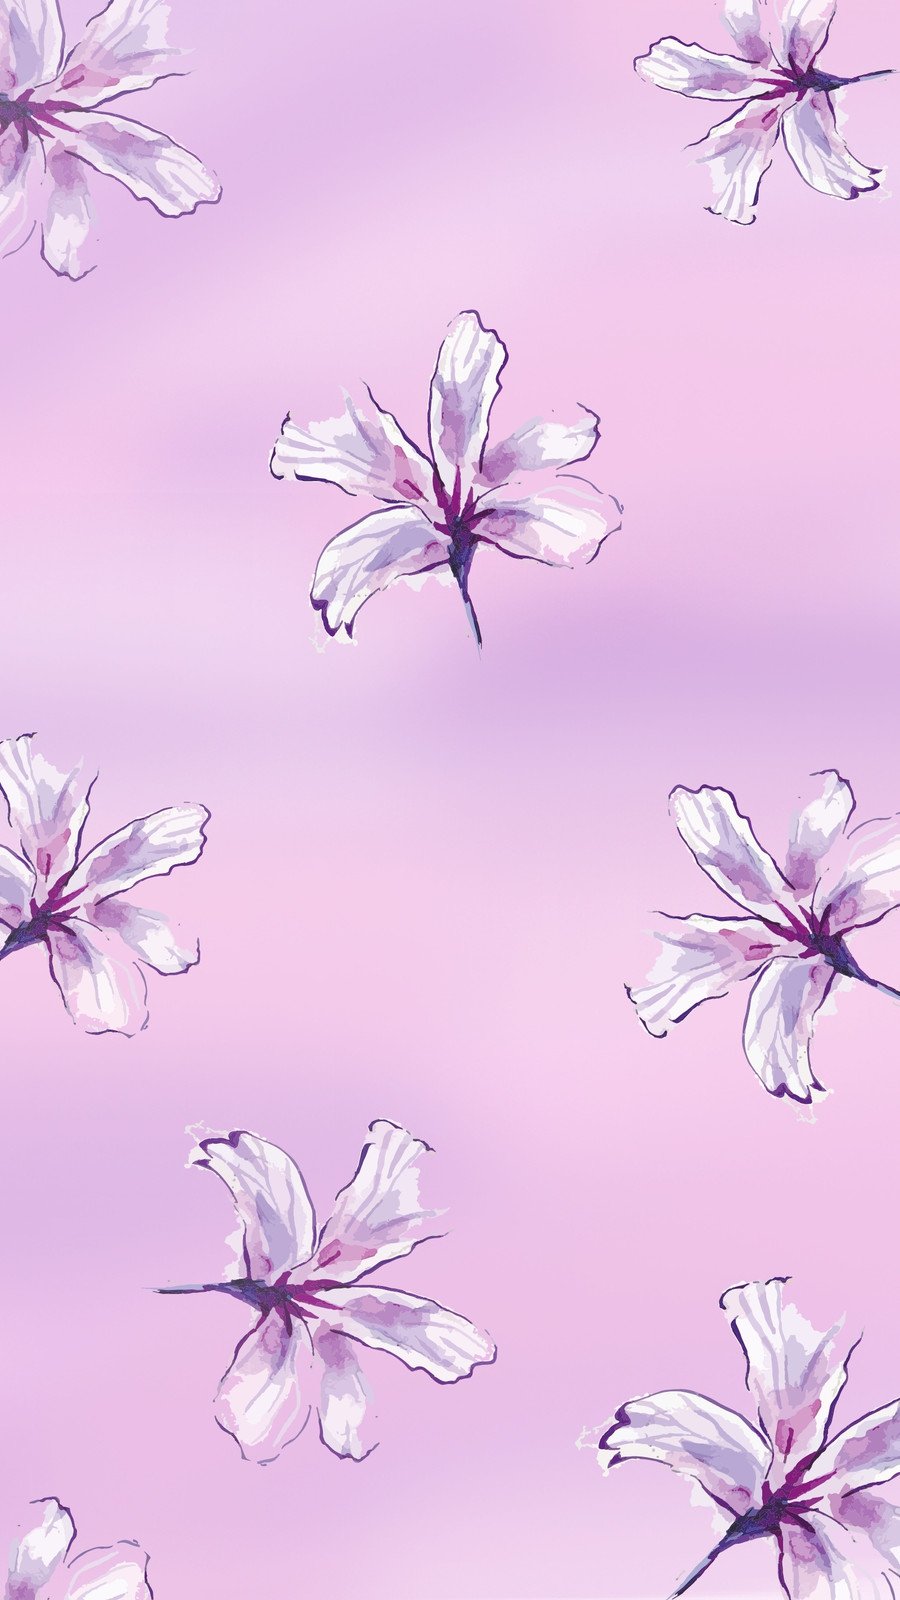 12 Dreamy Phone Wallpapers With Floral Illustrations Save Them For Free